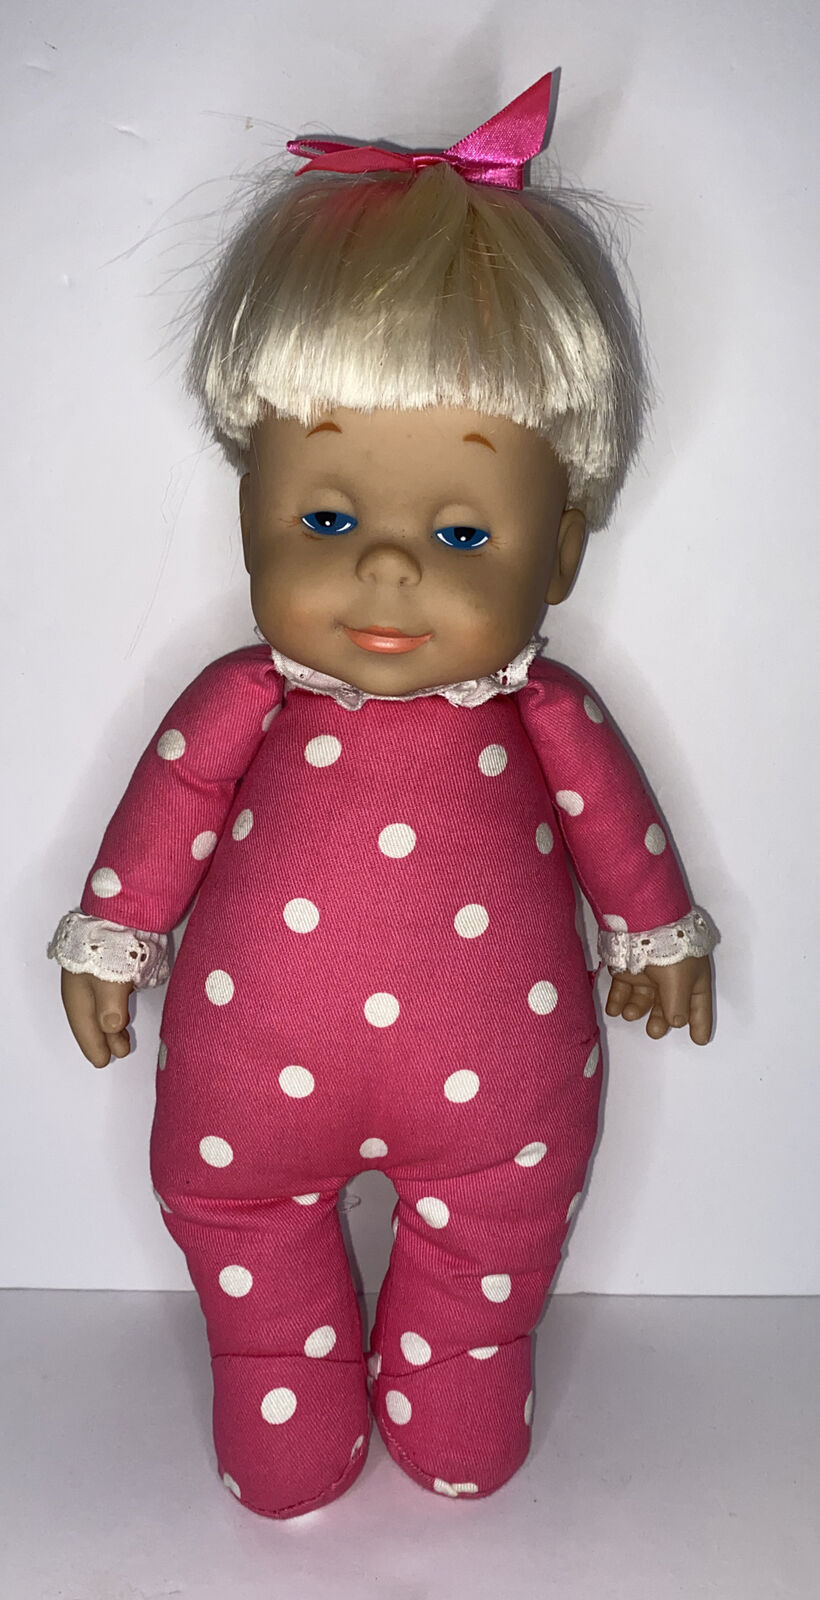 Vintage Drowsy Doll Pink Polka Dot Dressedw/hair Bow By Mattel 1964 Tested Works